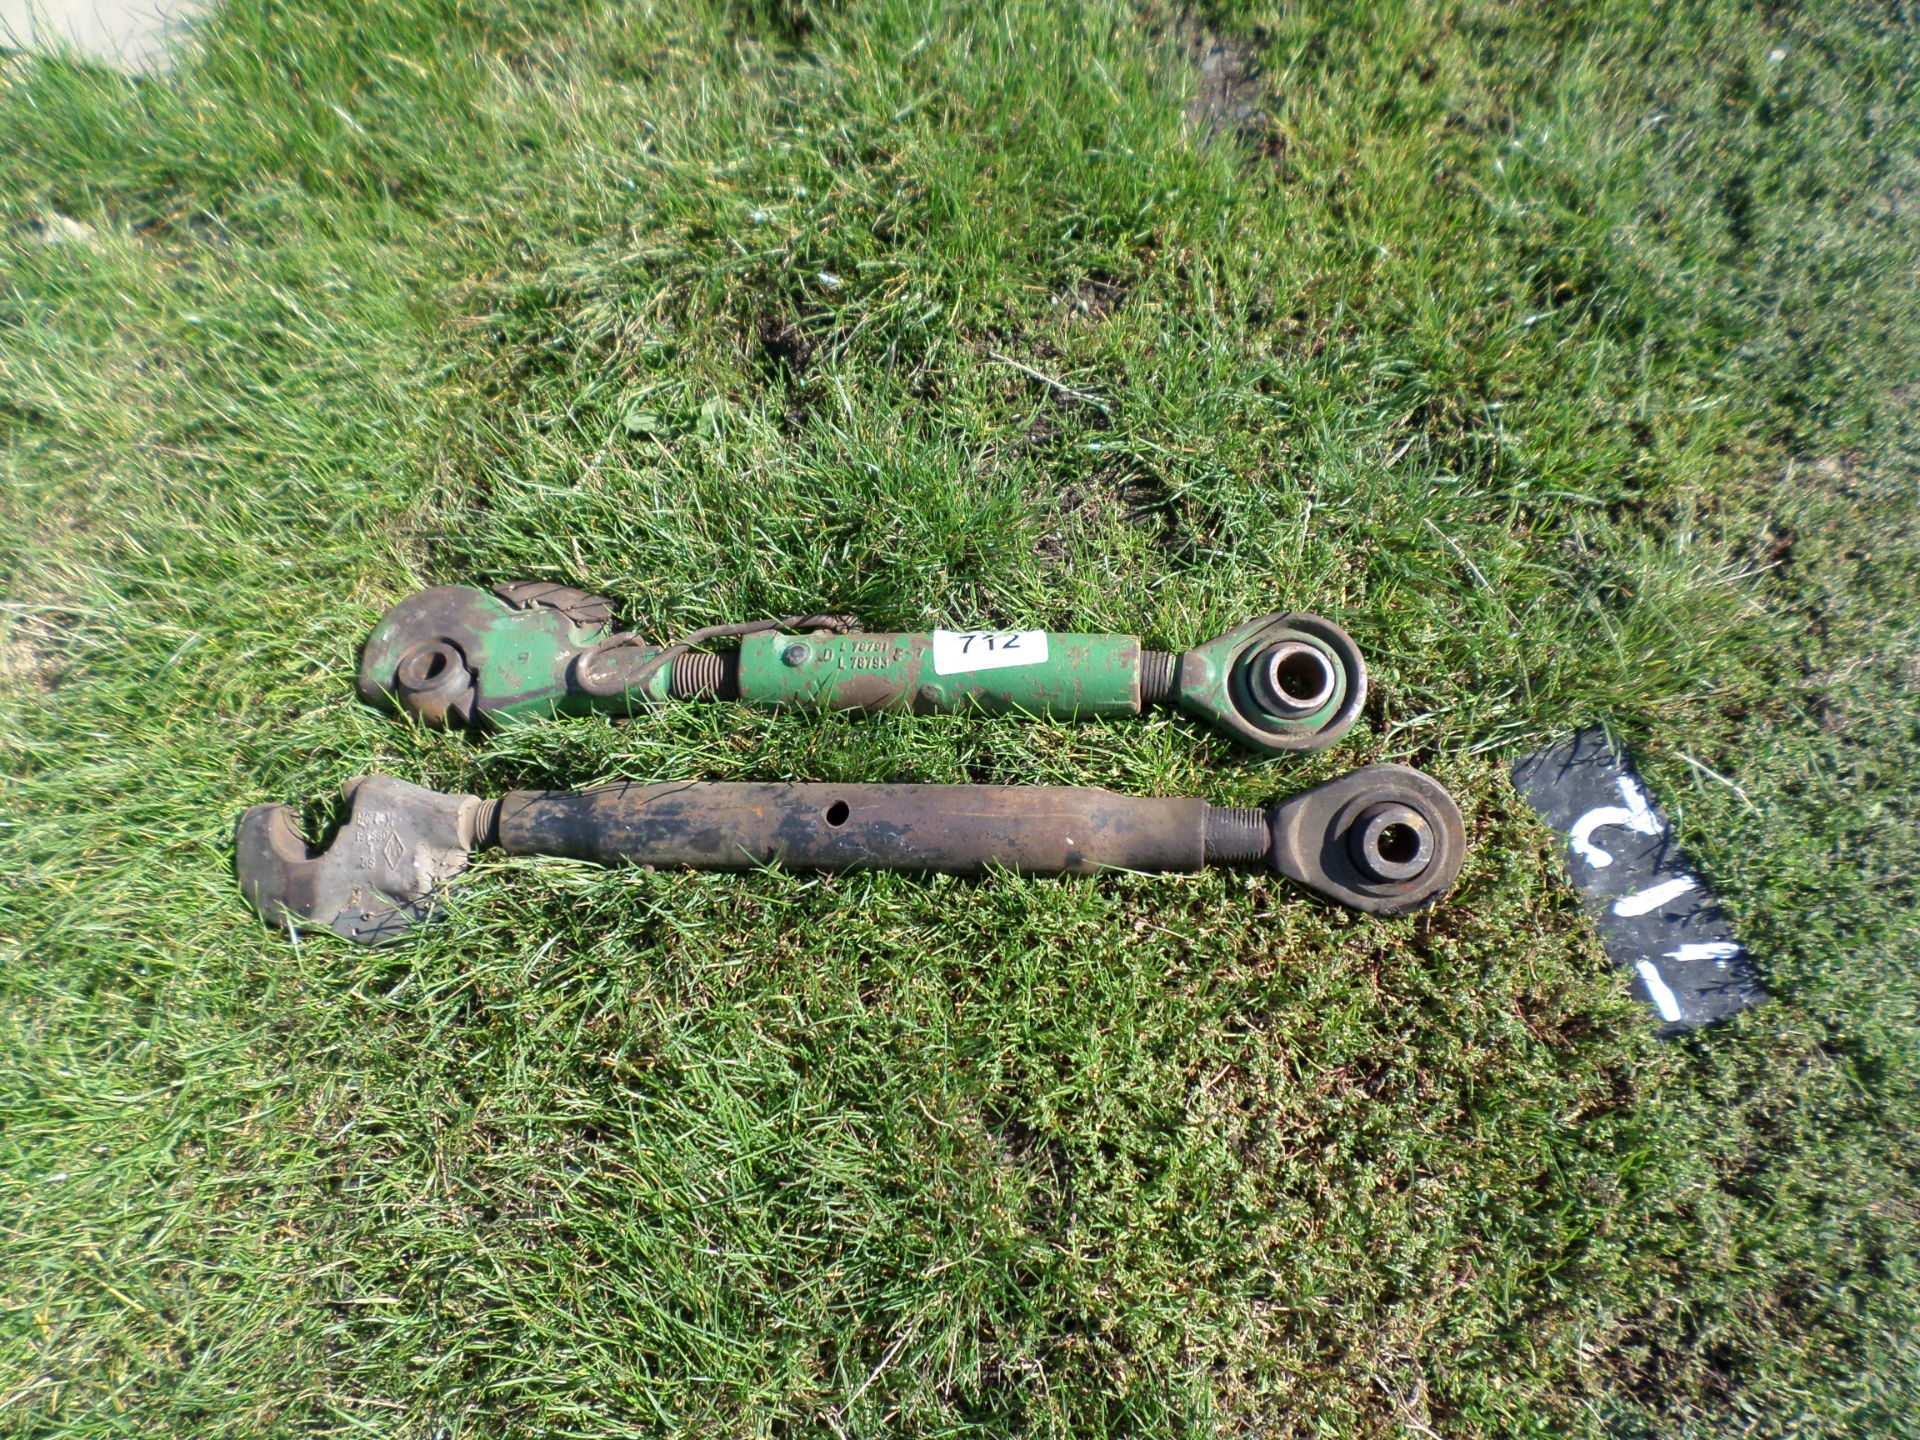 2 top links, one for John Deere and another